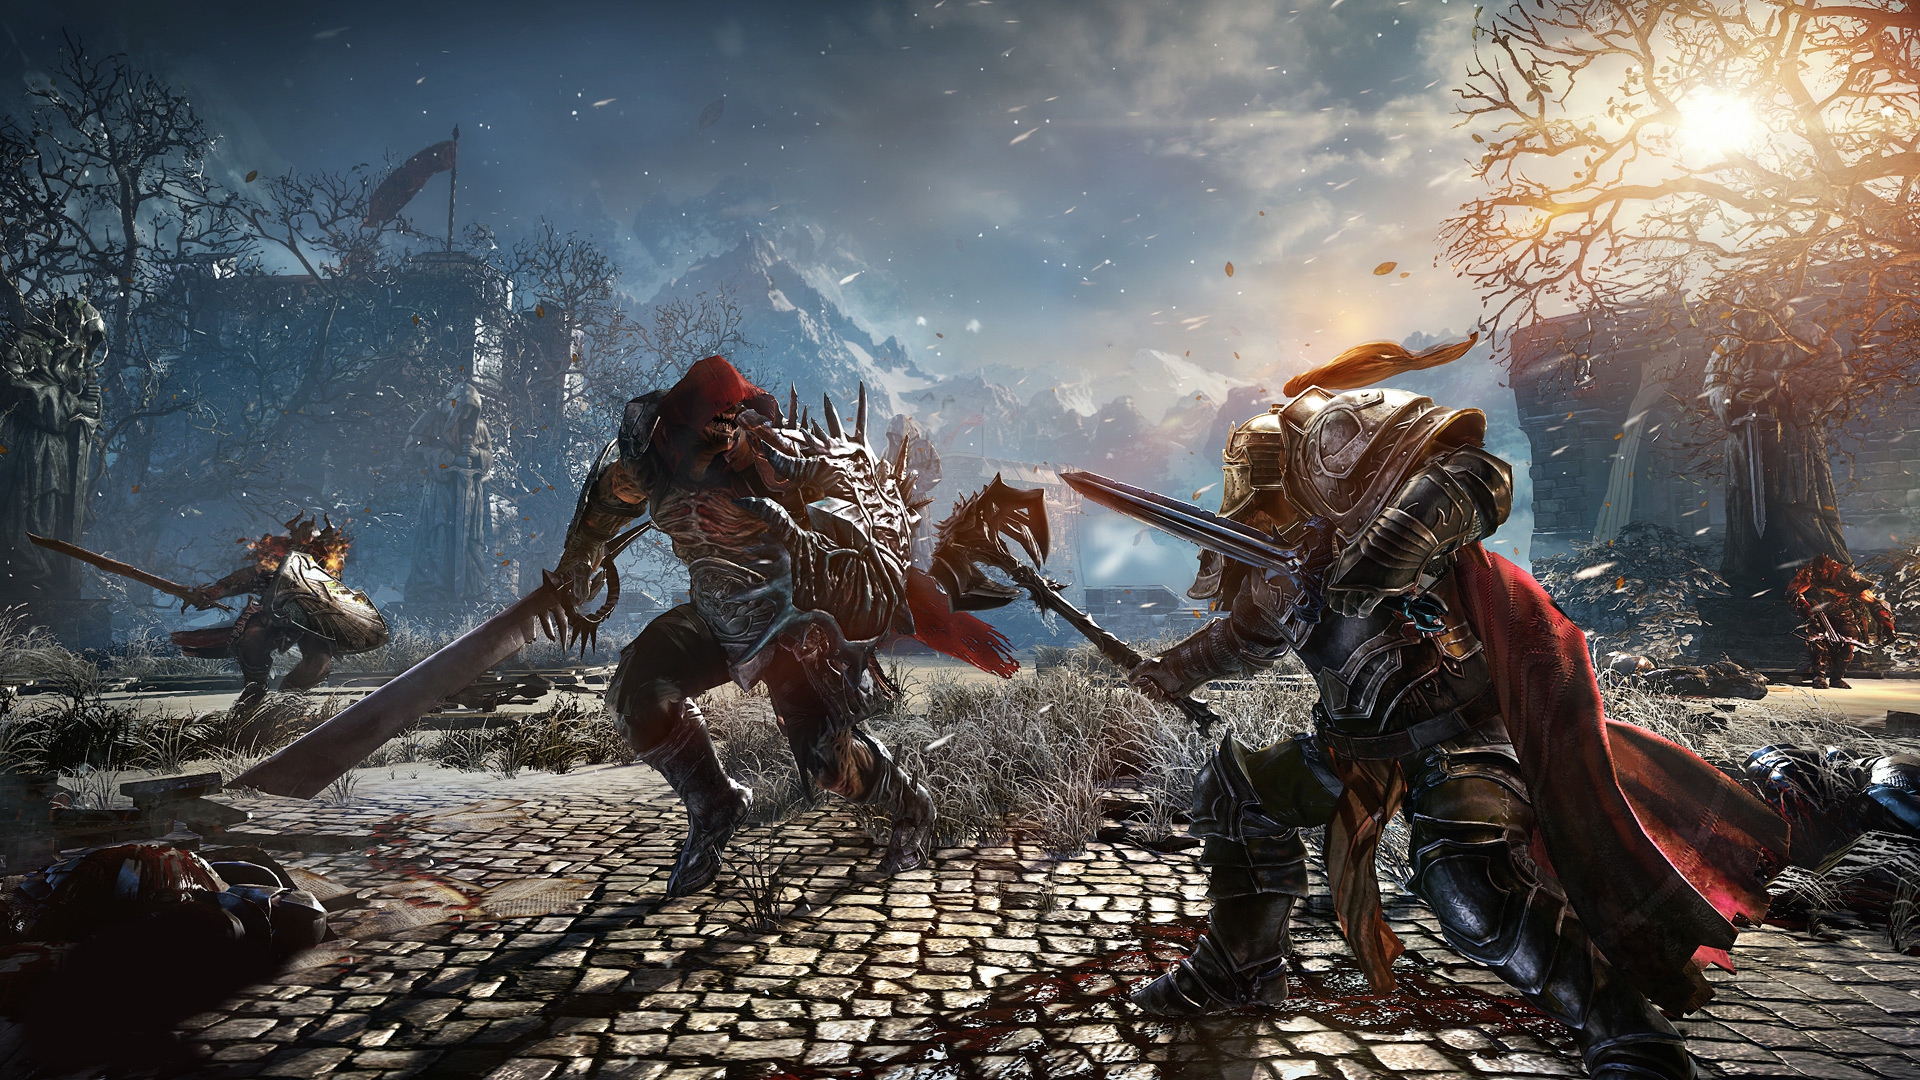 Rpg картинка. Игра Lords of the Fallen. Lords of the Fallen (ps4). Игра Lords of the Fallen 2. Lords of the Fallen Харкин.